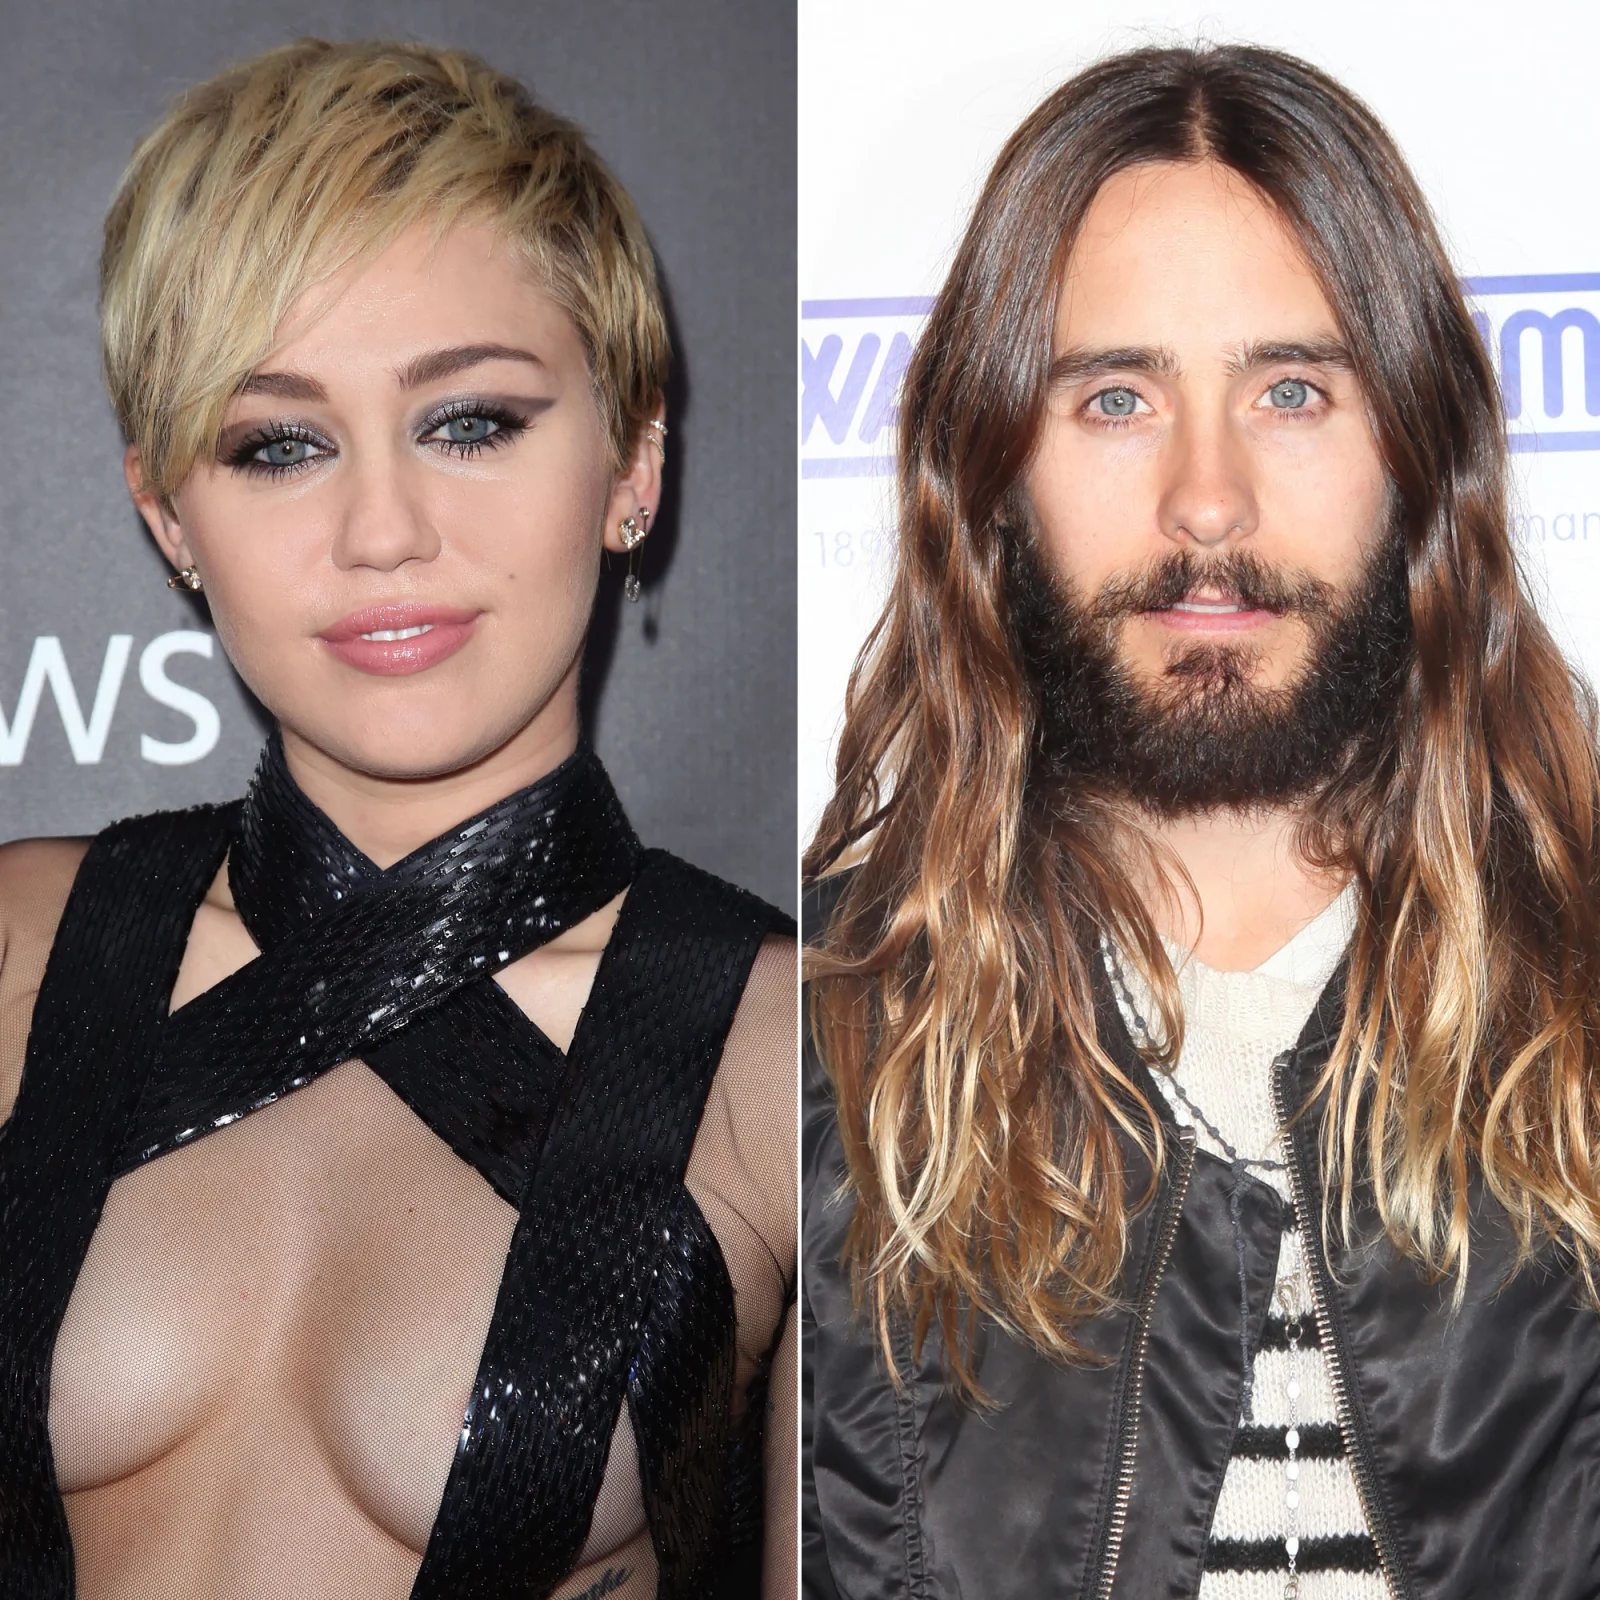 Miley Cyrus dating history Jared Leto